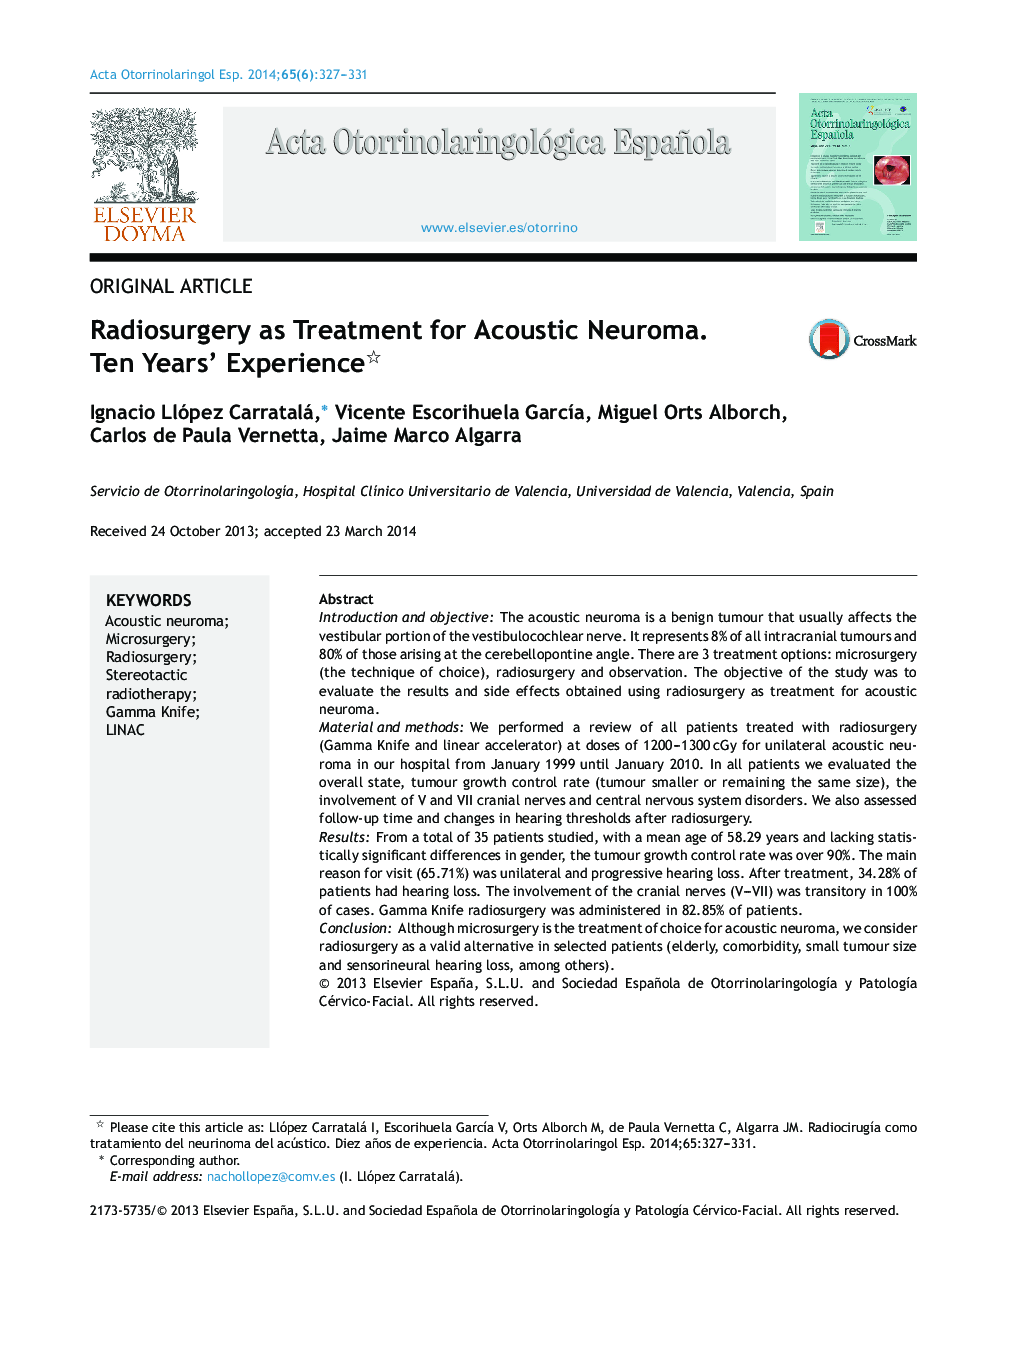 Radiosurgery as Treatment for Acoustic Neuroma. Ten Years’ Experience 